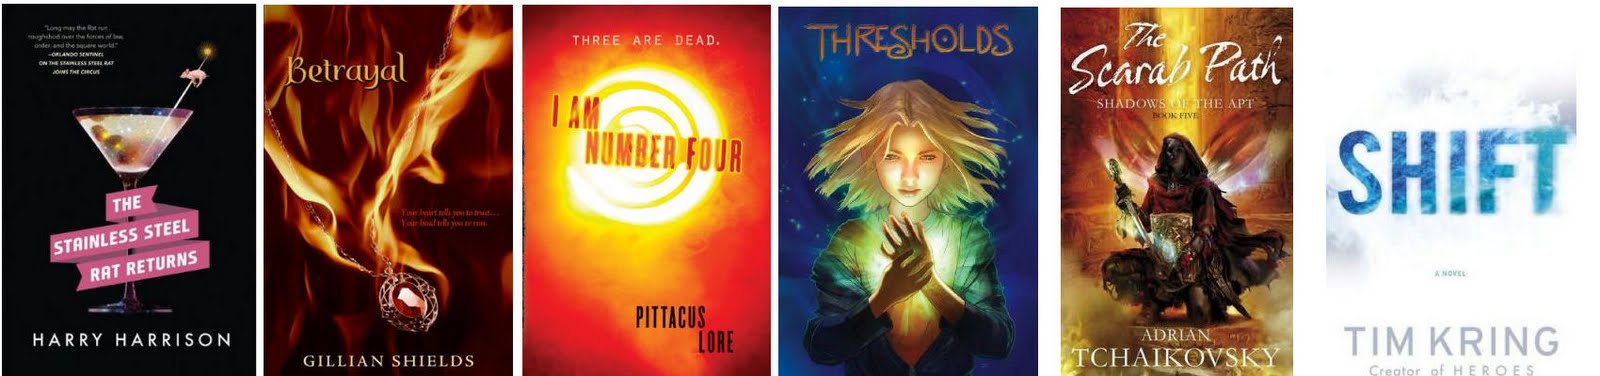 Pittacus Lore Next Book Release